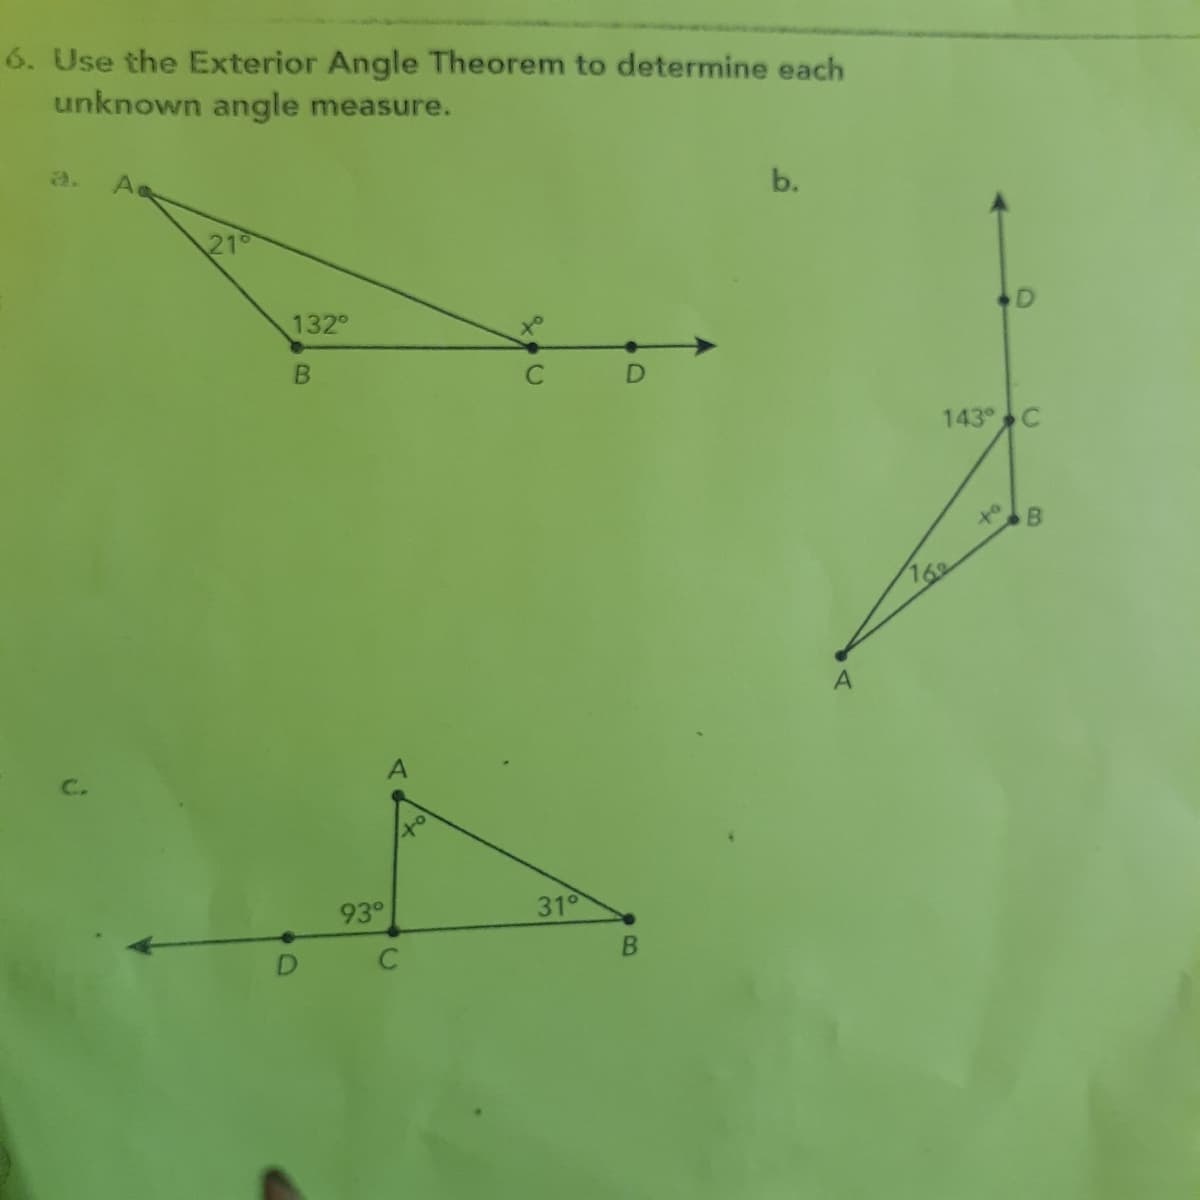 6. Use the Exterior Angle Theorem to determine each
unknown angle measure.
a.
b.
21
132
to
143 C
16
C.
93°
31
